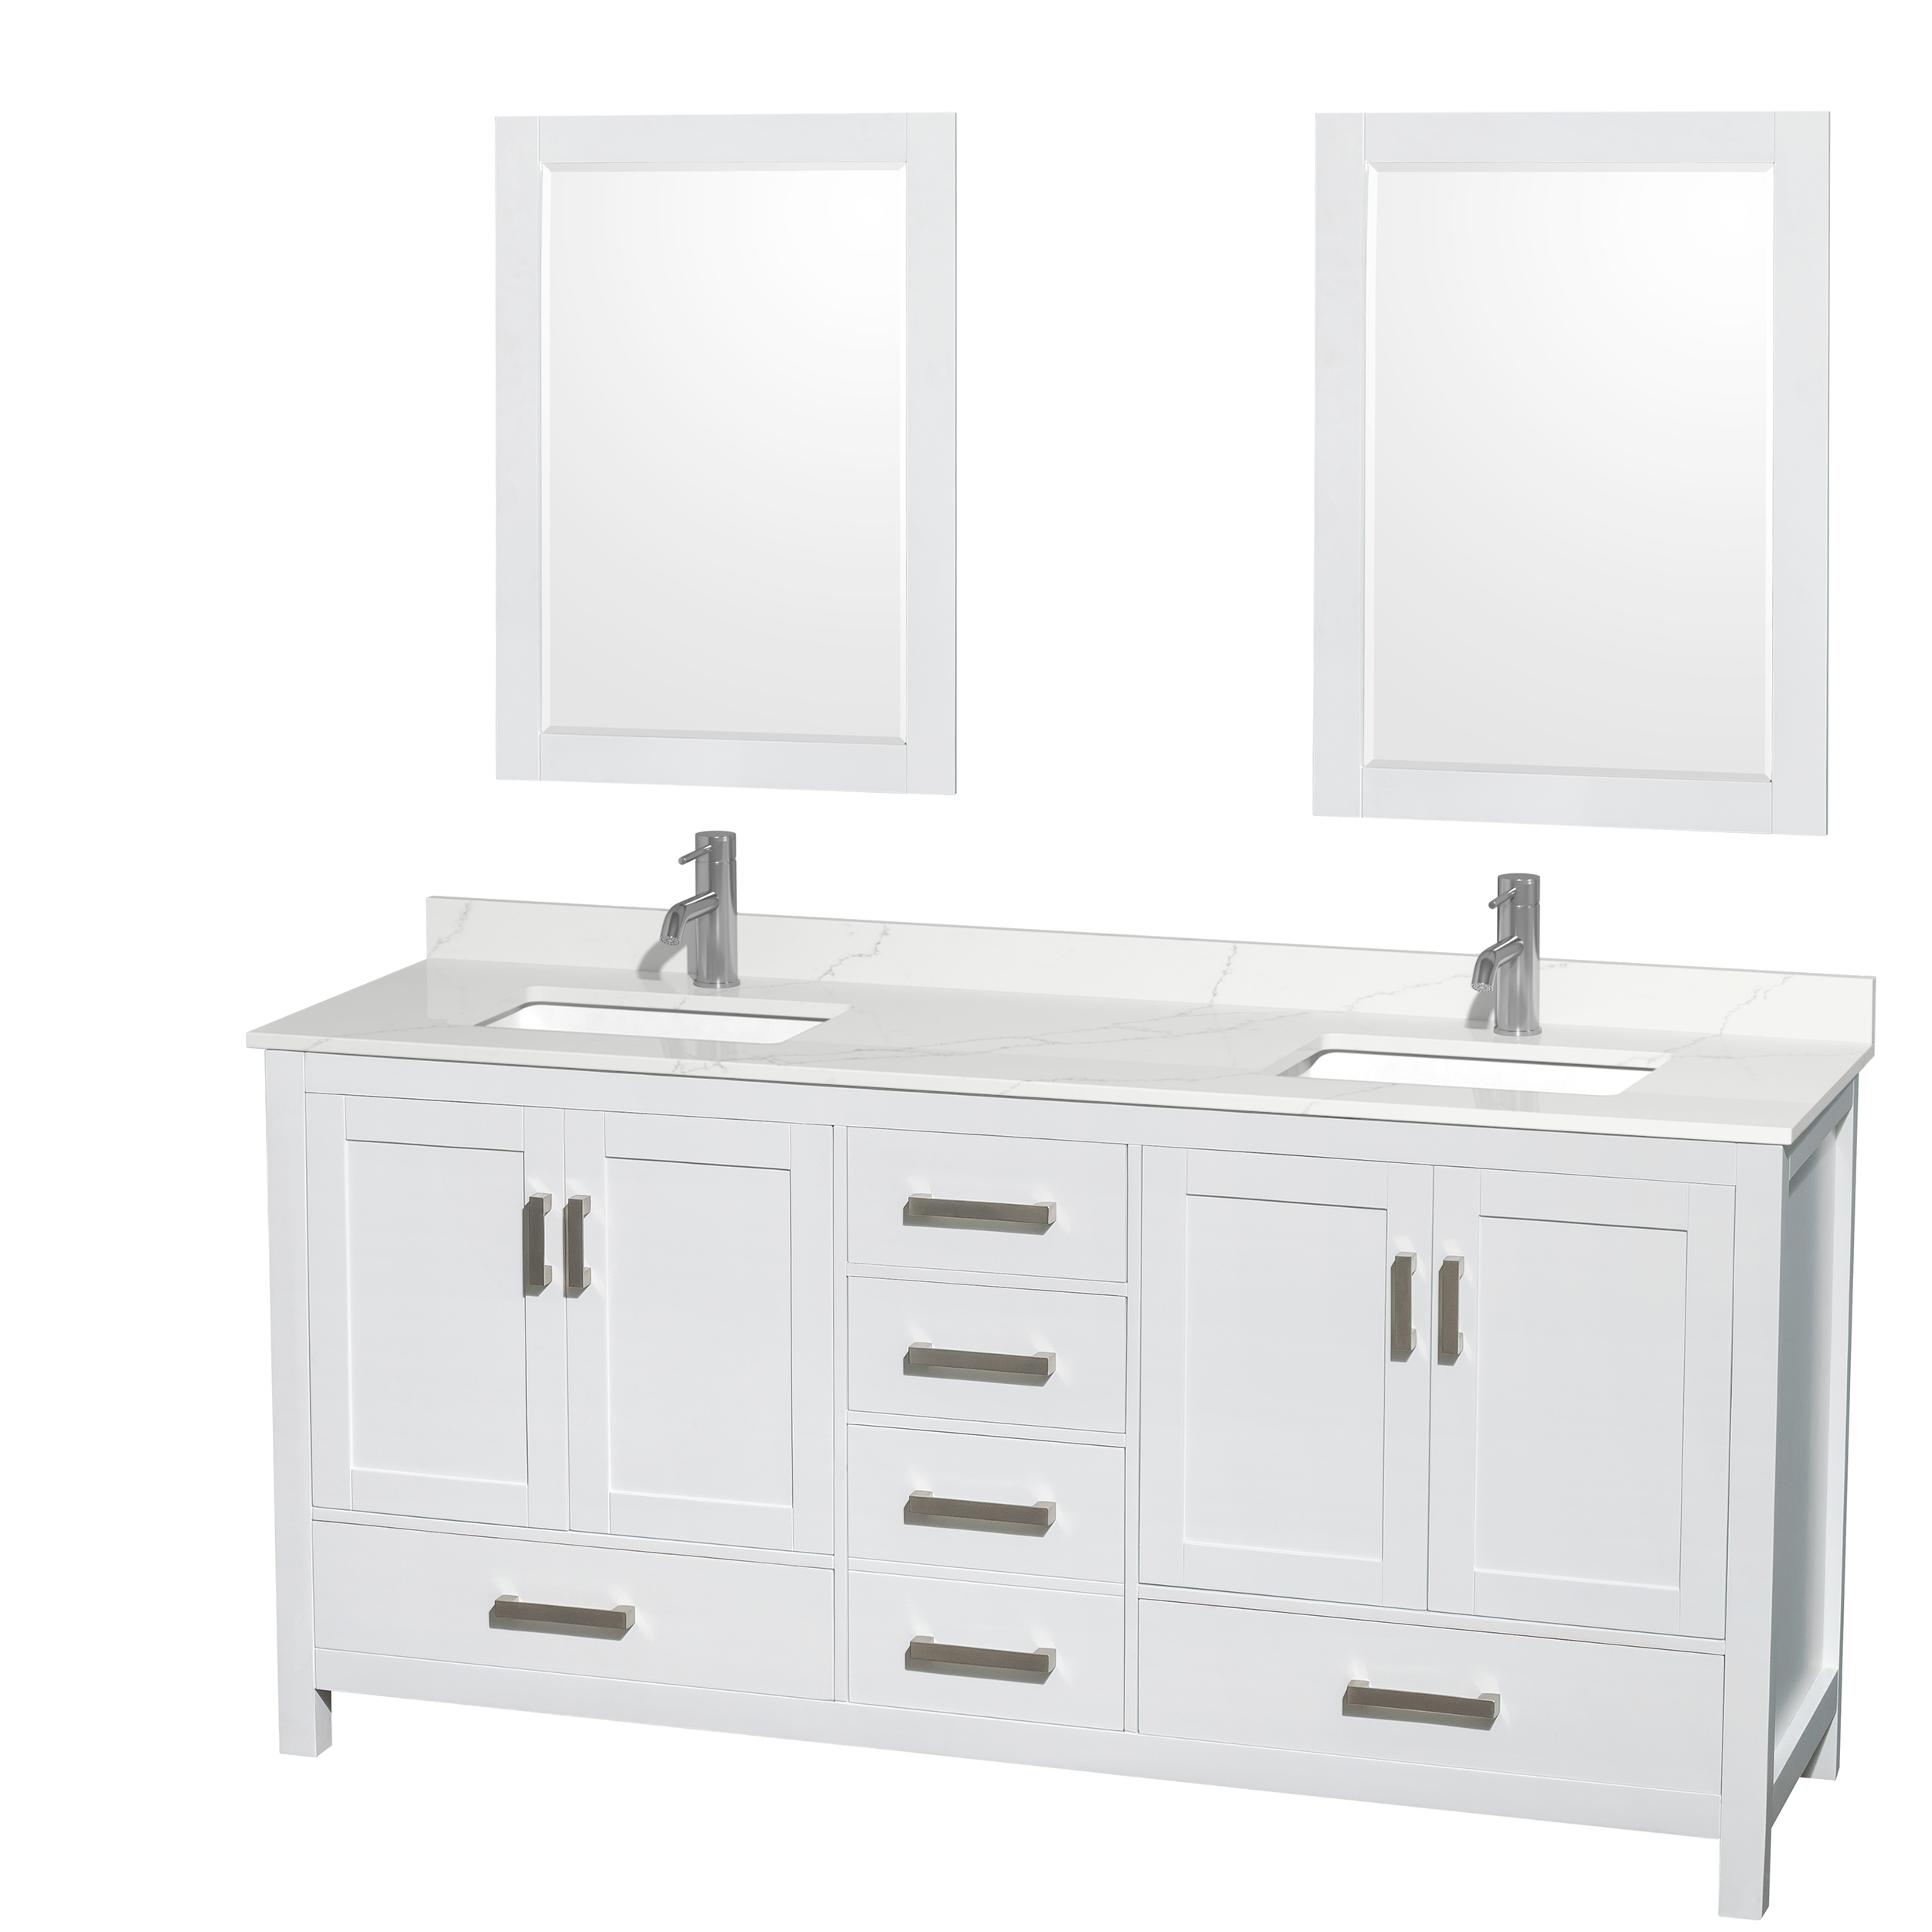 Sheffield 72" Double Bathroom Vanity by Wyndham Collection - White WC-1414-72-DBL-VAN-WHT-